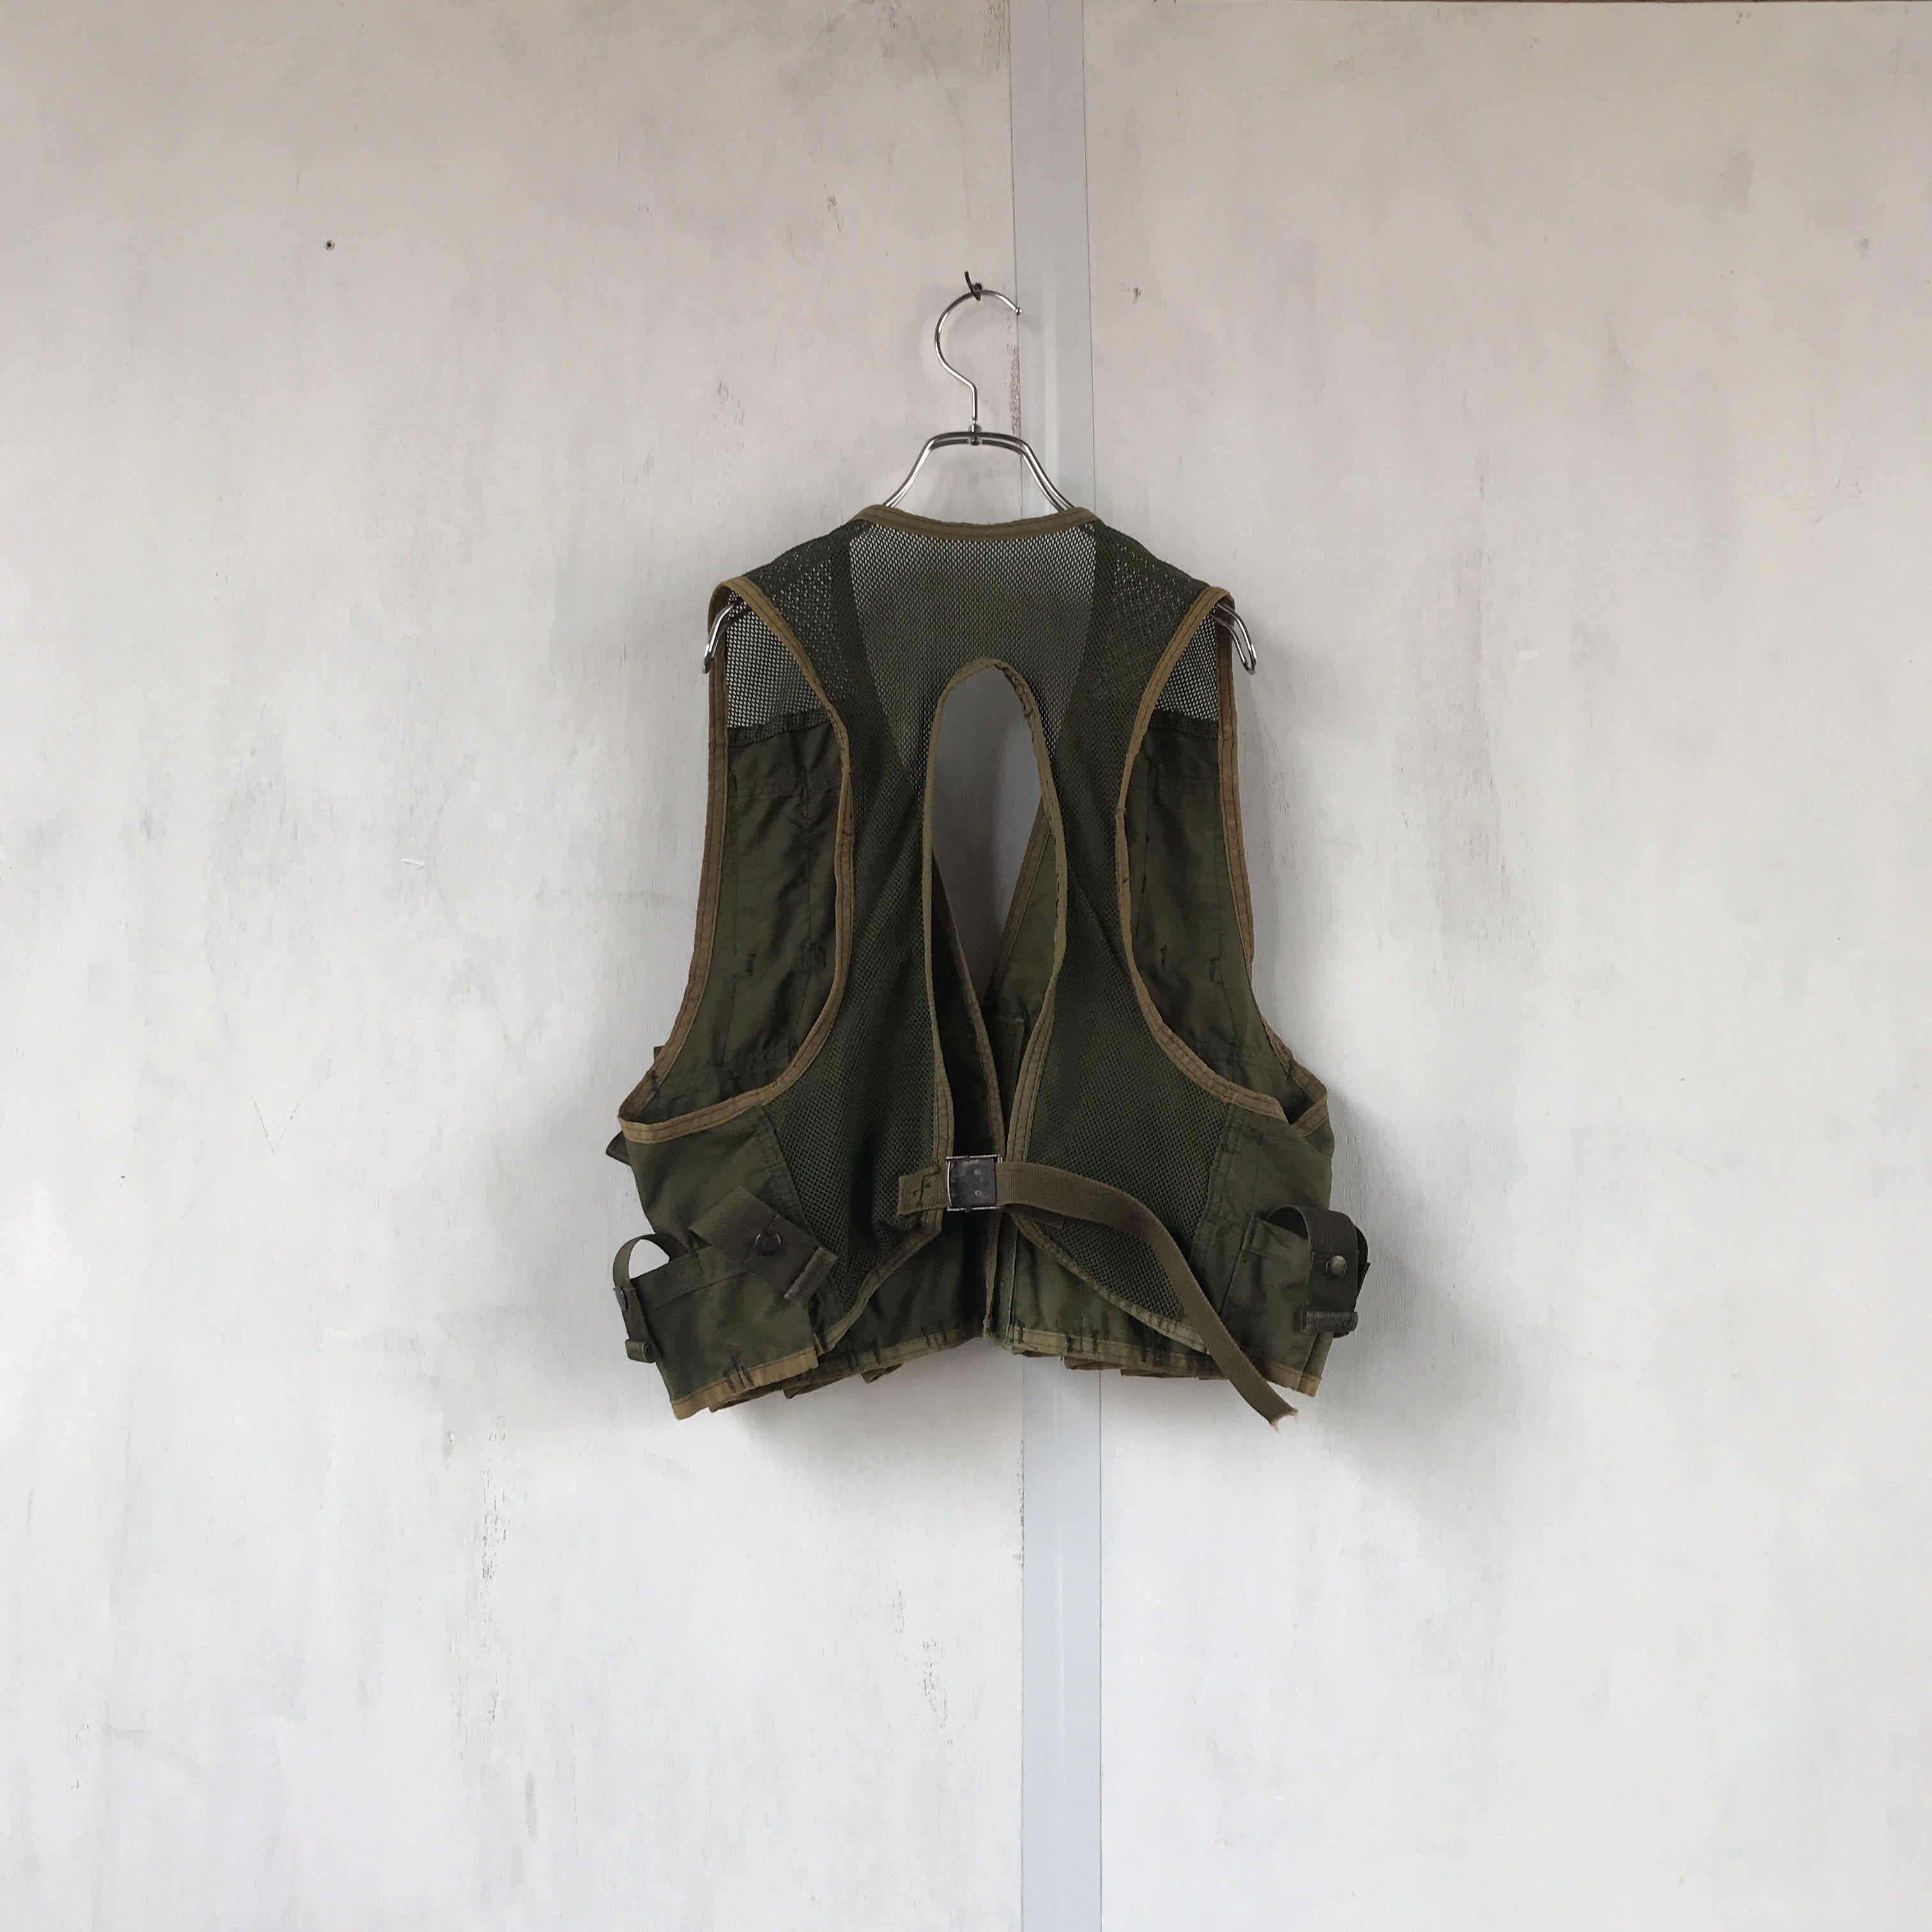 [ ONLY ONE ! ] GRENADE VEST / U.S.MILITARY